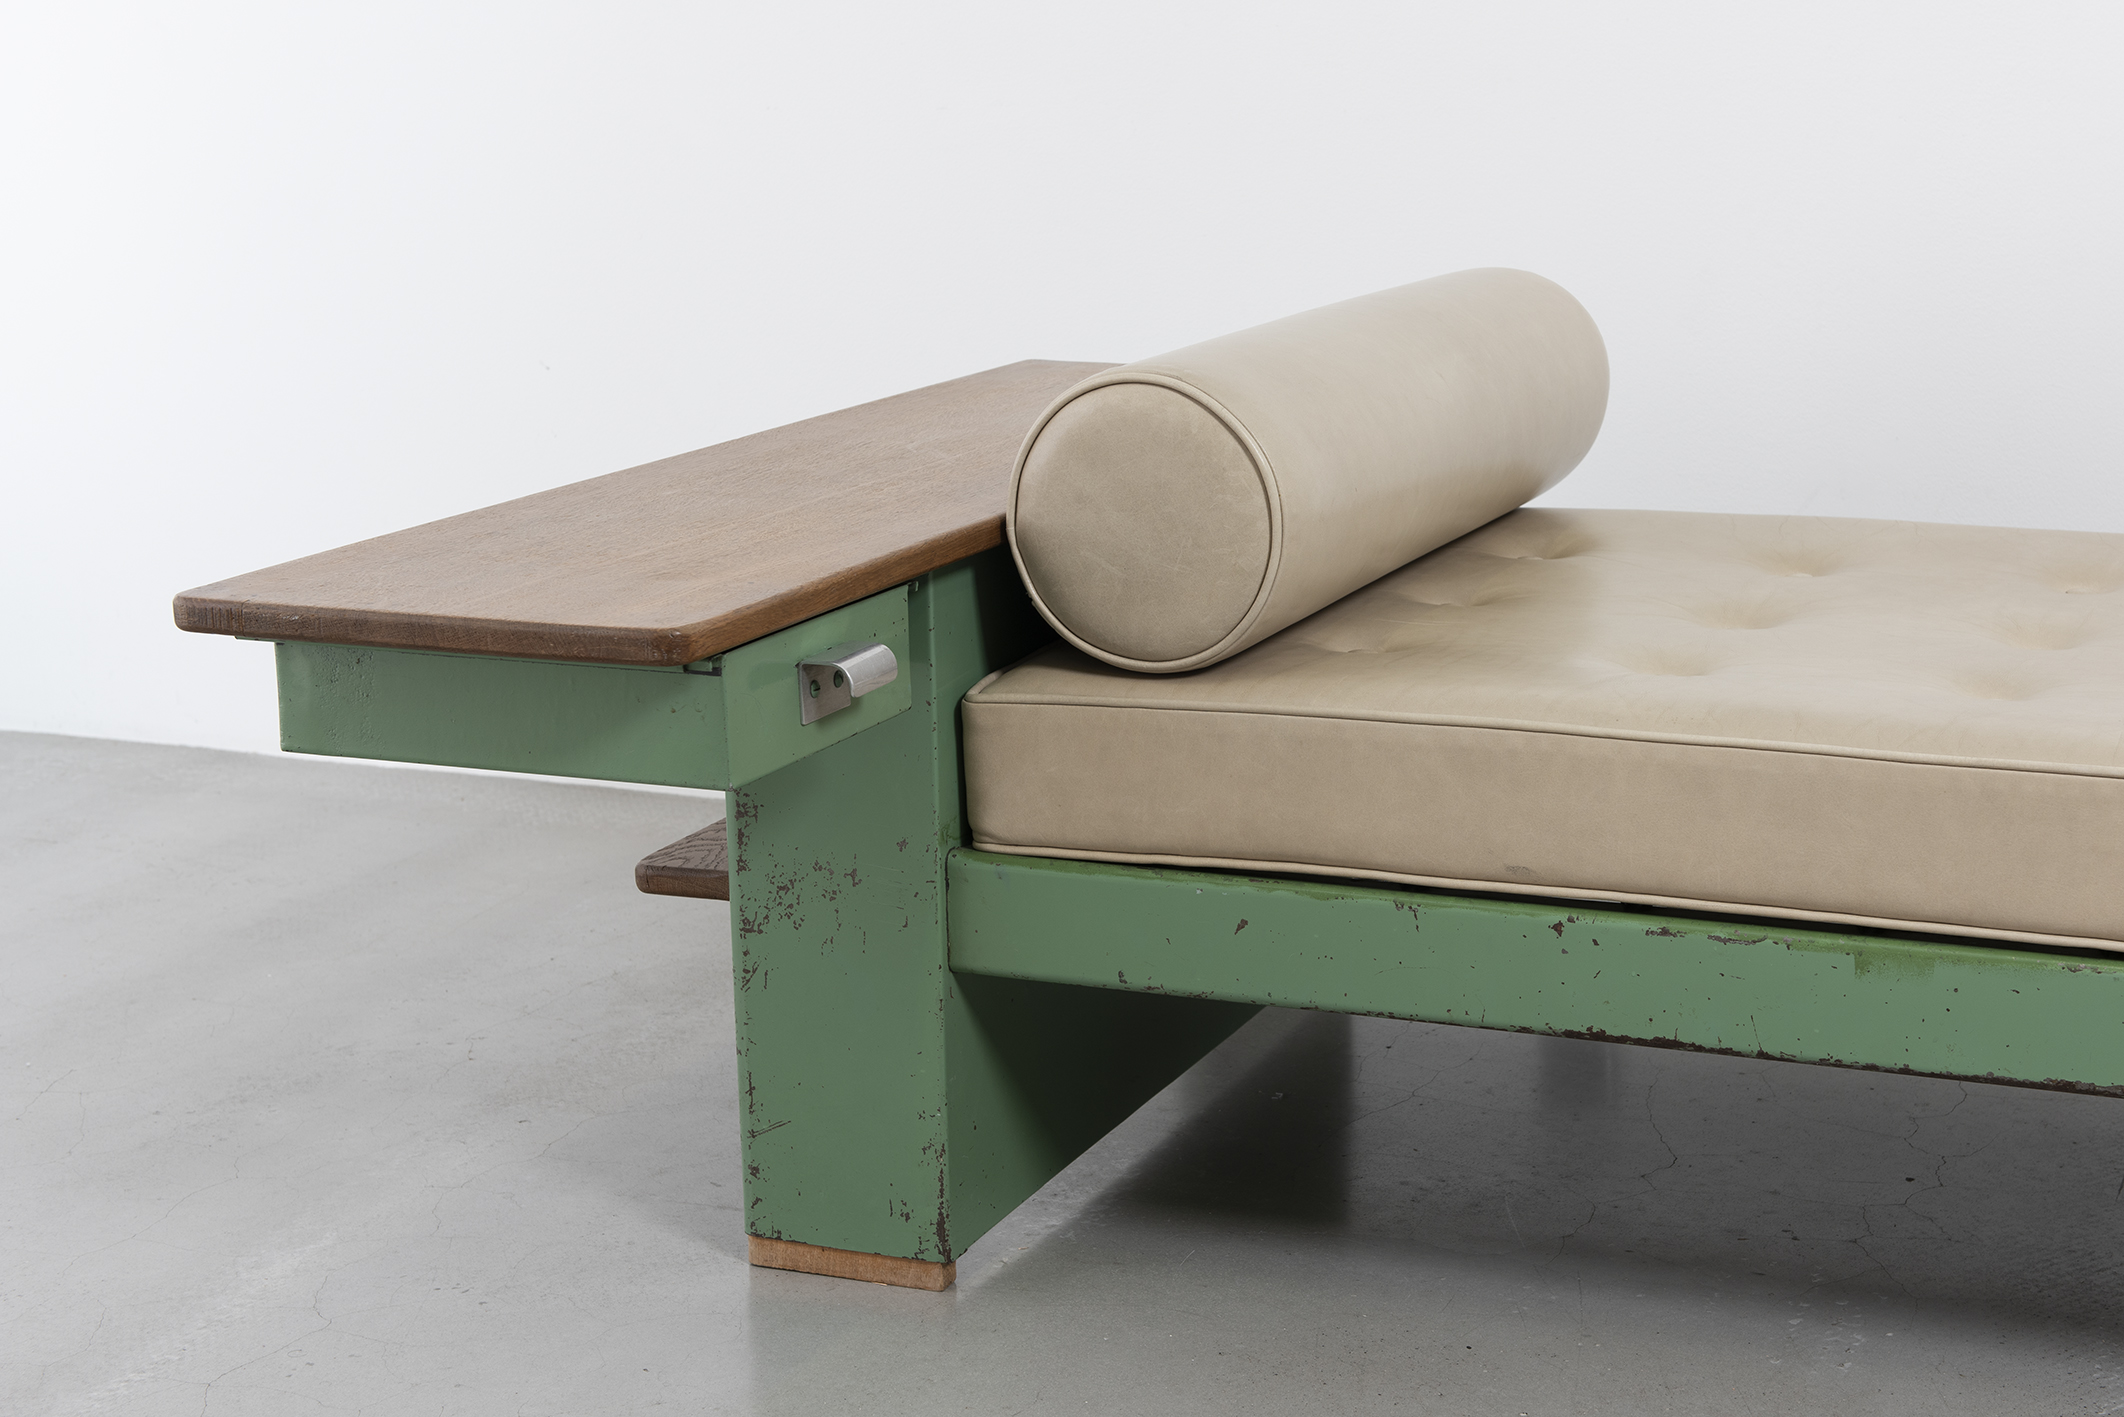 Cité bed no. 456 with asymmetrical bedside table, ca. 1951.